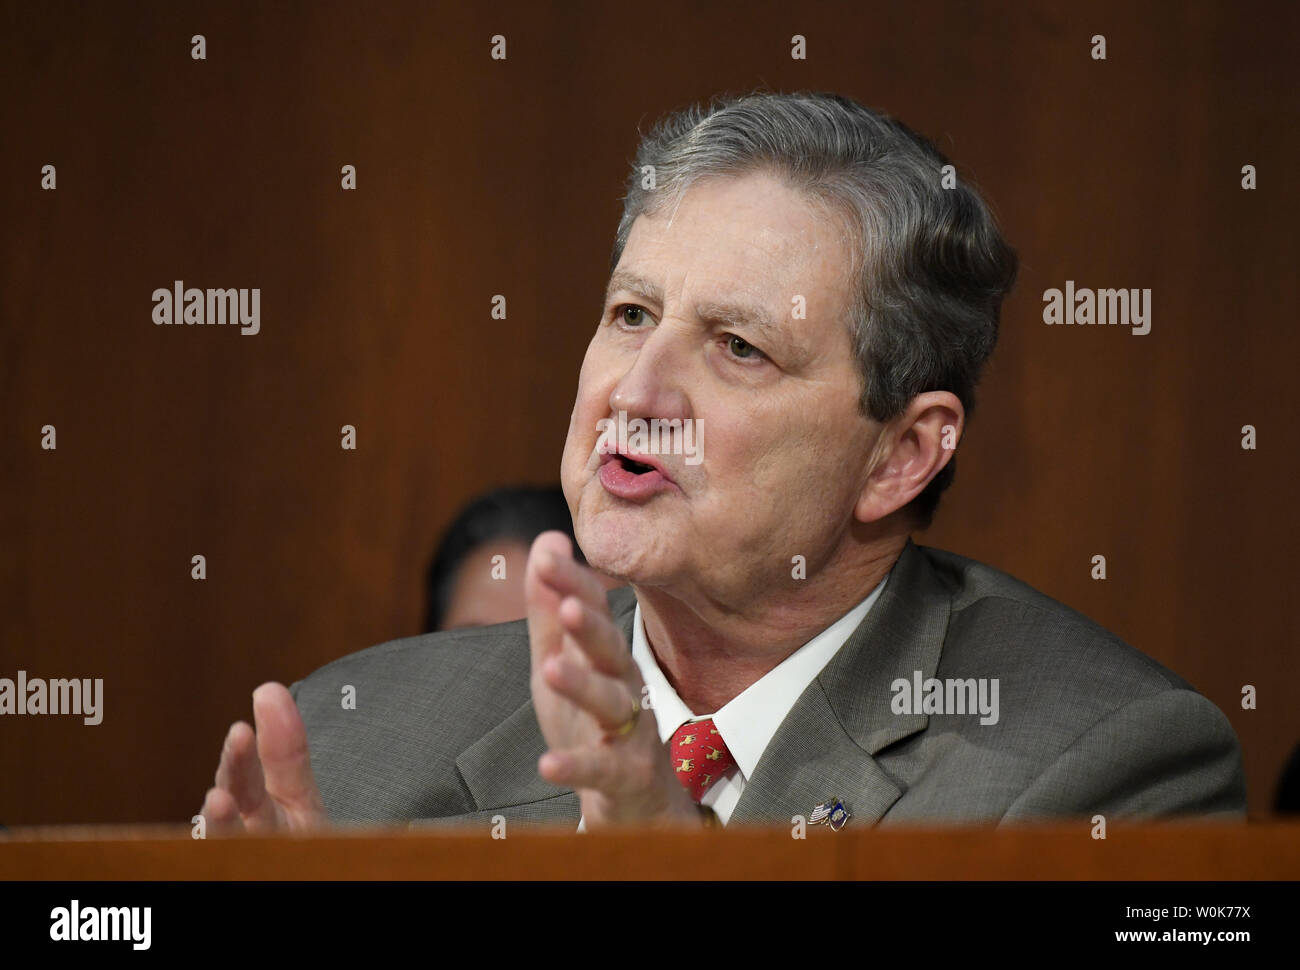 Sen. John Kennedy, R-La., delivers his opening statement during the Judiciary Committee confirmation hearing for Supreme Court Justice nominee Brett M. Kavanaugh on Capitol Hill in Washington, DC on September 4, 2018. Judge Kavanaugh was nominated to fill the seat of Justice Anthony M. Kennedy who announced his retirement in June.  Photo by Pat Benic/UPI Stock Photo